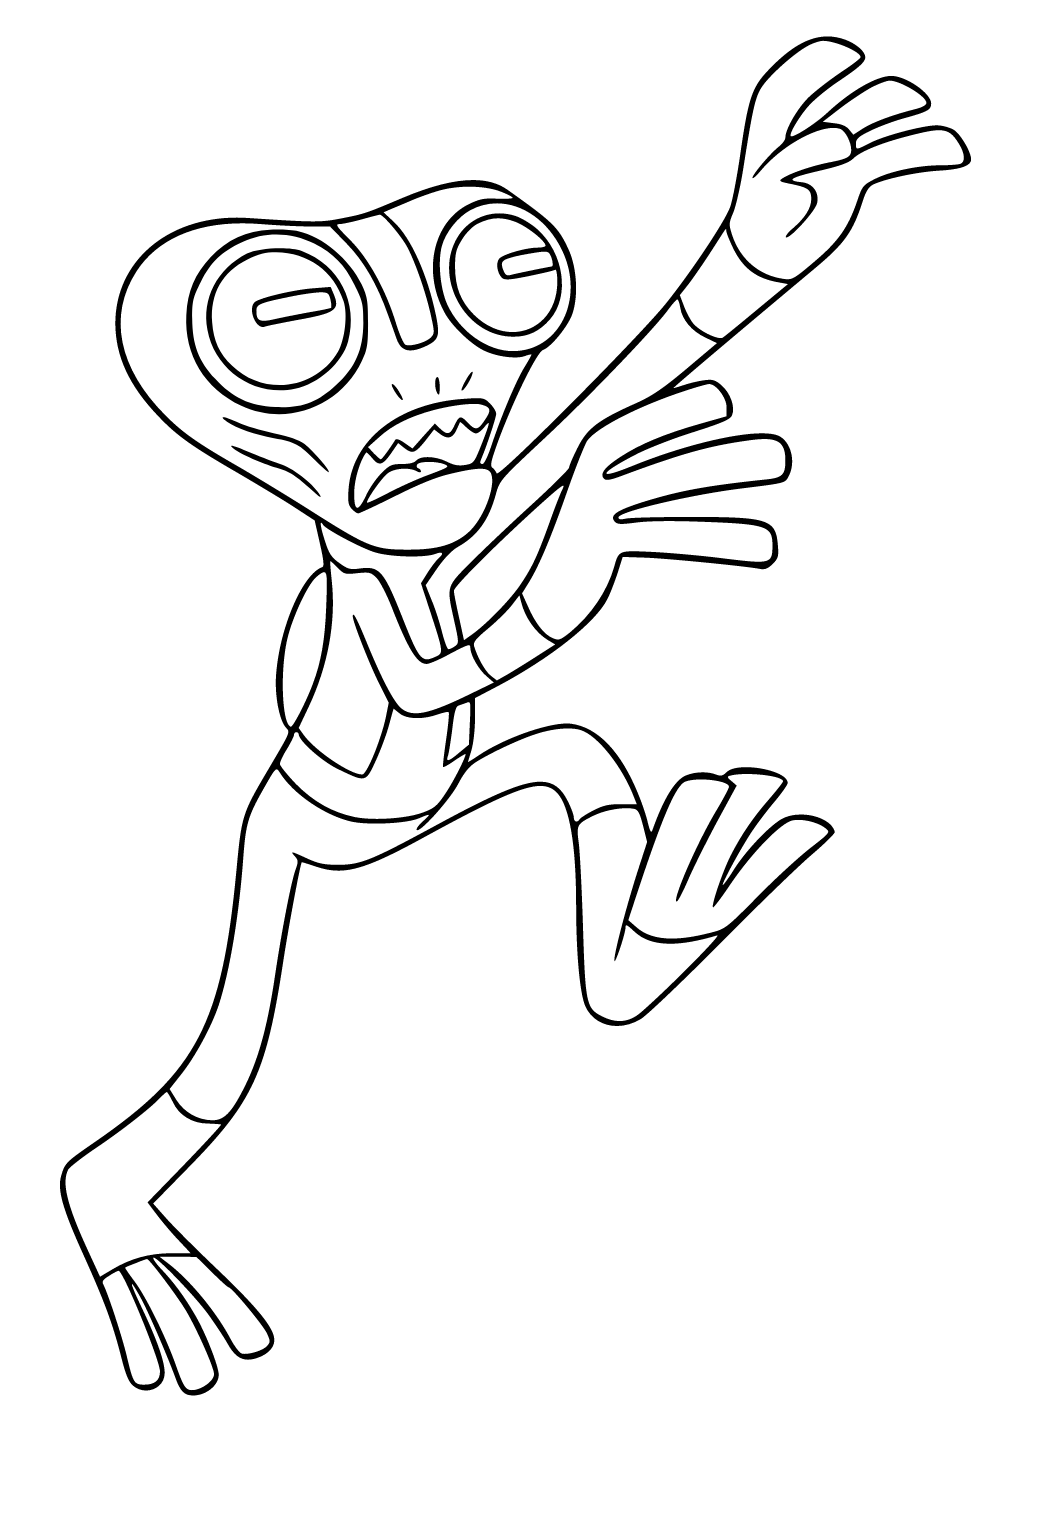 Alien Ben Coloring Pages cho Android - Tải về